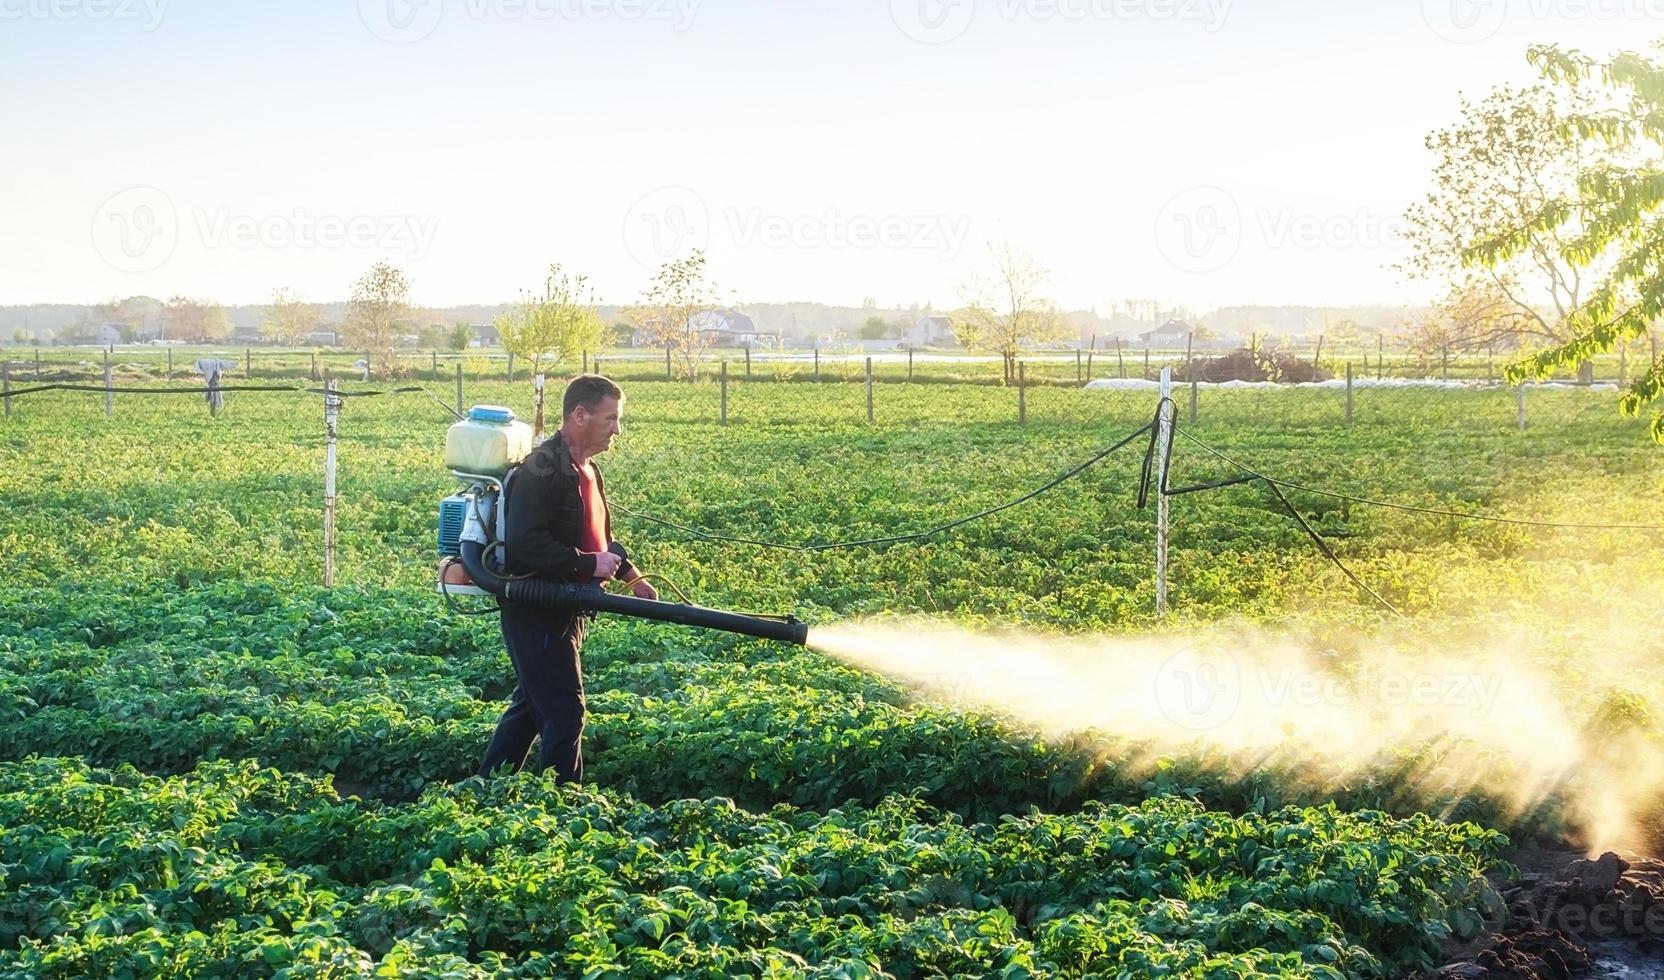 A farmer sprinkles a potato plantation with an antifungal chemical. Use chemicals in agriculture. Agriculture and agribusiness, agricultural industry. Fight against fungal infections and insects. photo